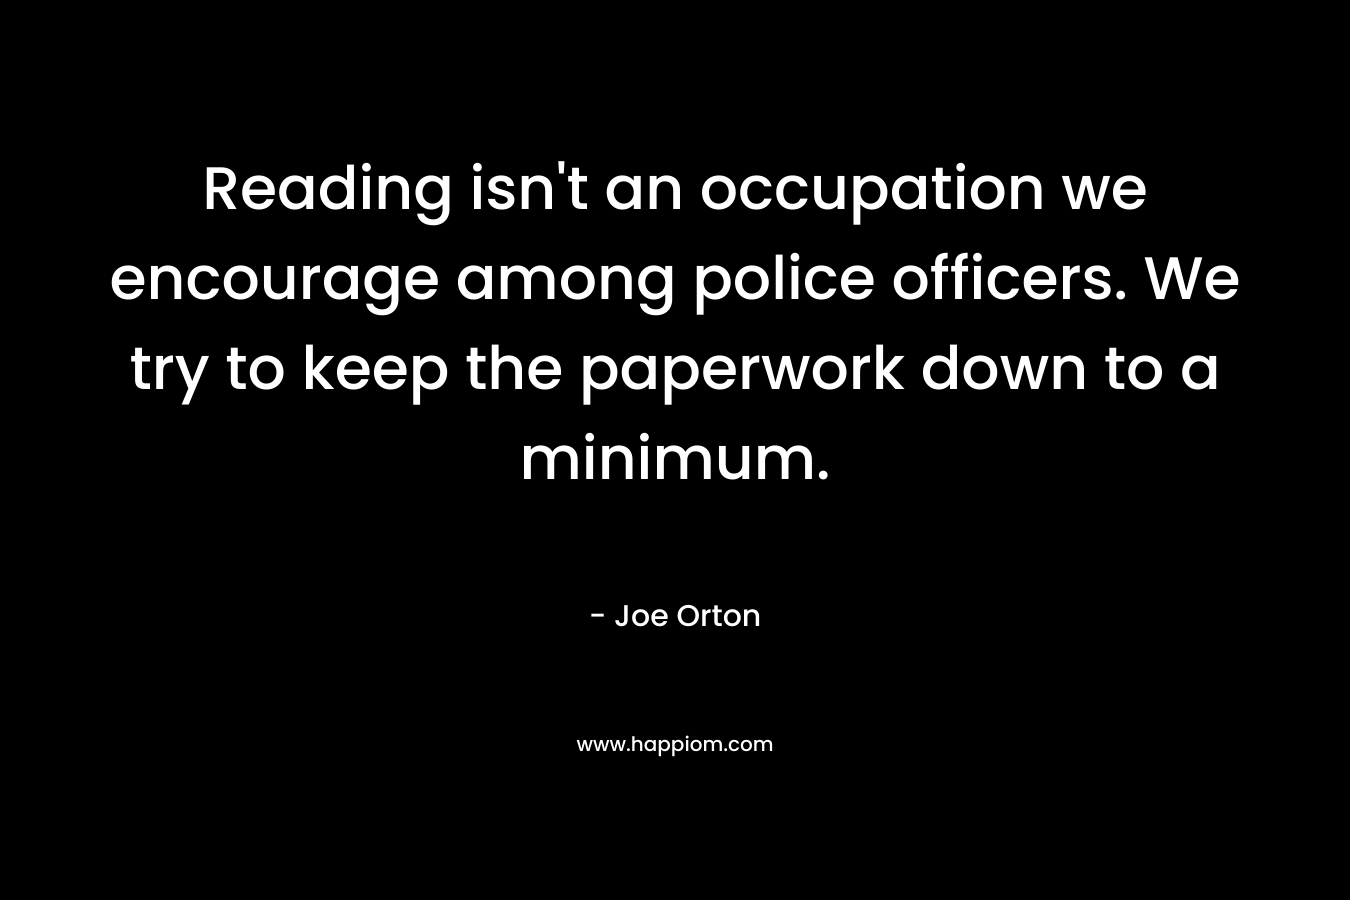 Reading isn't an occupation we encourage among police officers. We try to keep the paperwork down to a minimum.